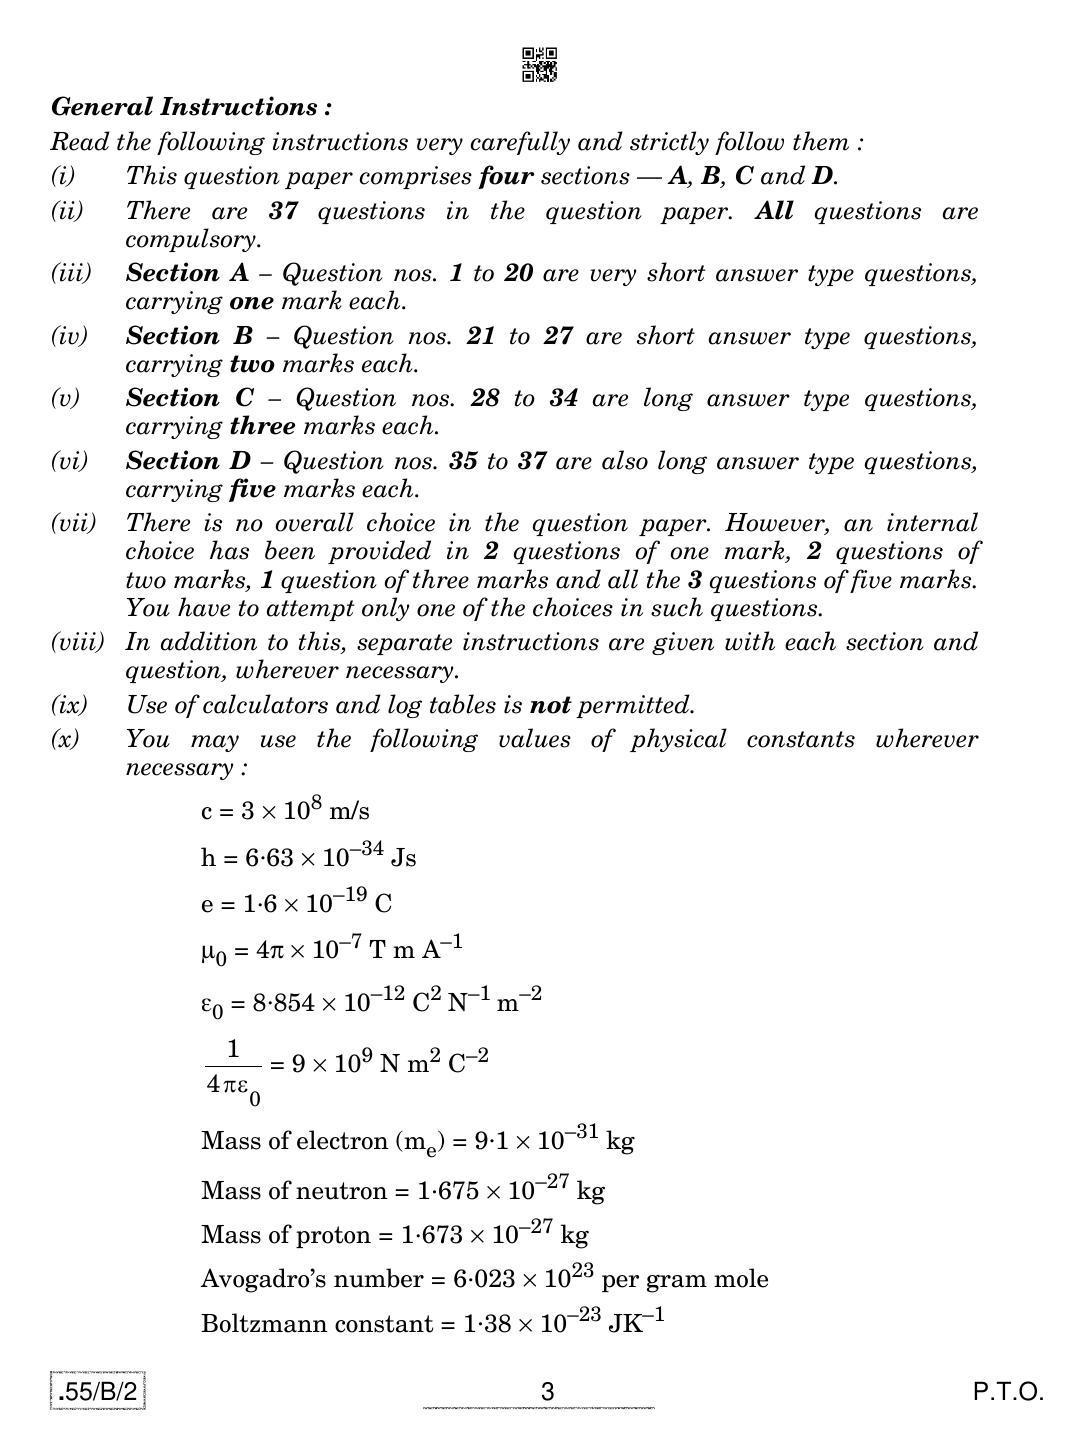 CBSE Class 12 55-C-2 - Physics 2020 Compartment Question Paper - Page 3